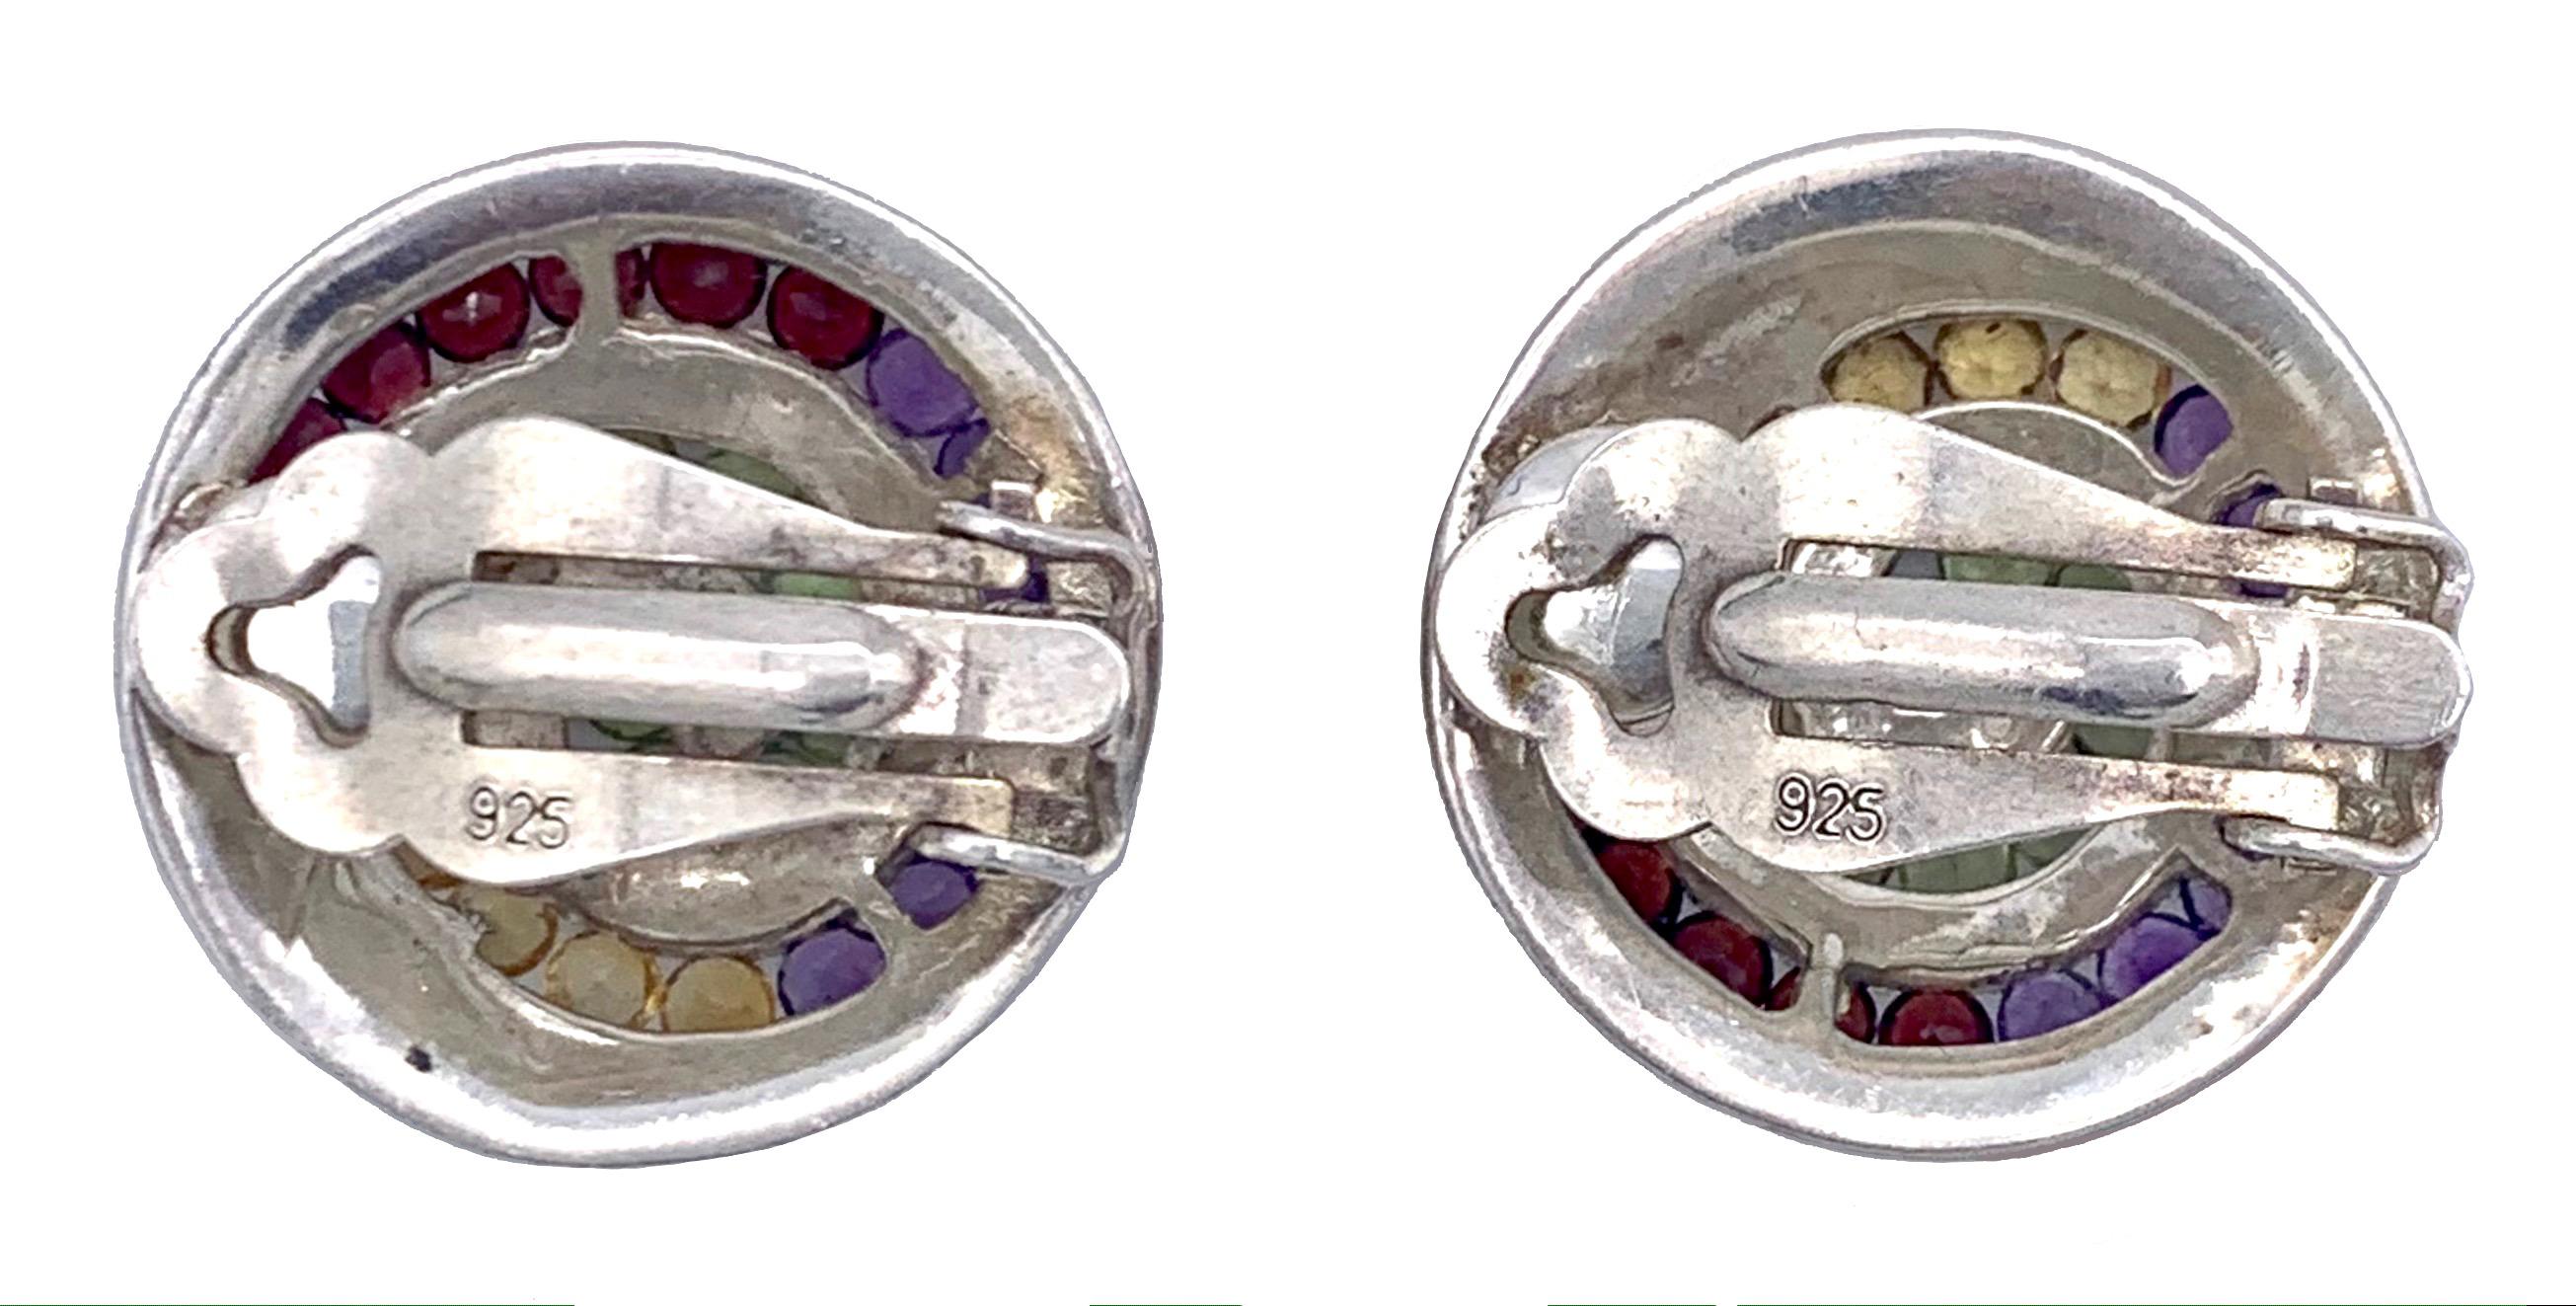 The Sterling siver ear clips are decorated with a spiral motive set with garnets, amethysts, citrines and peridots.